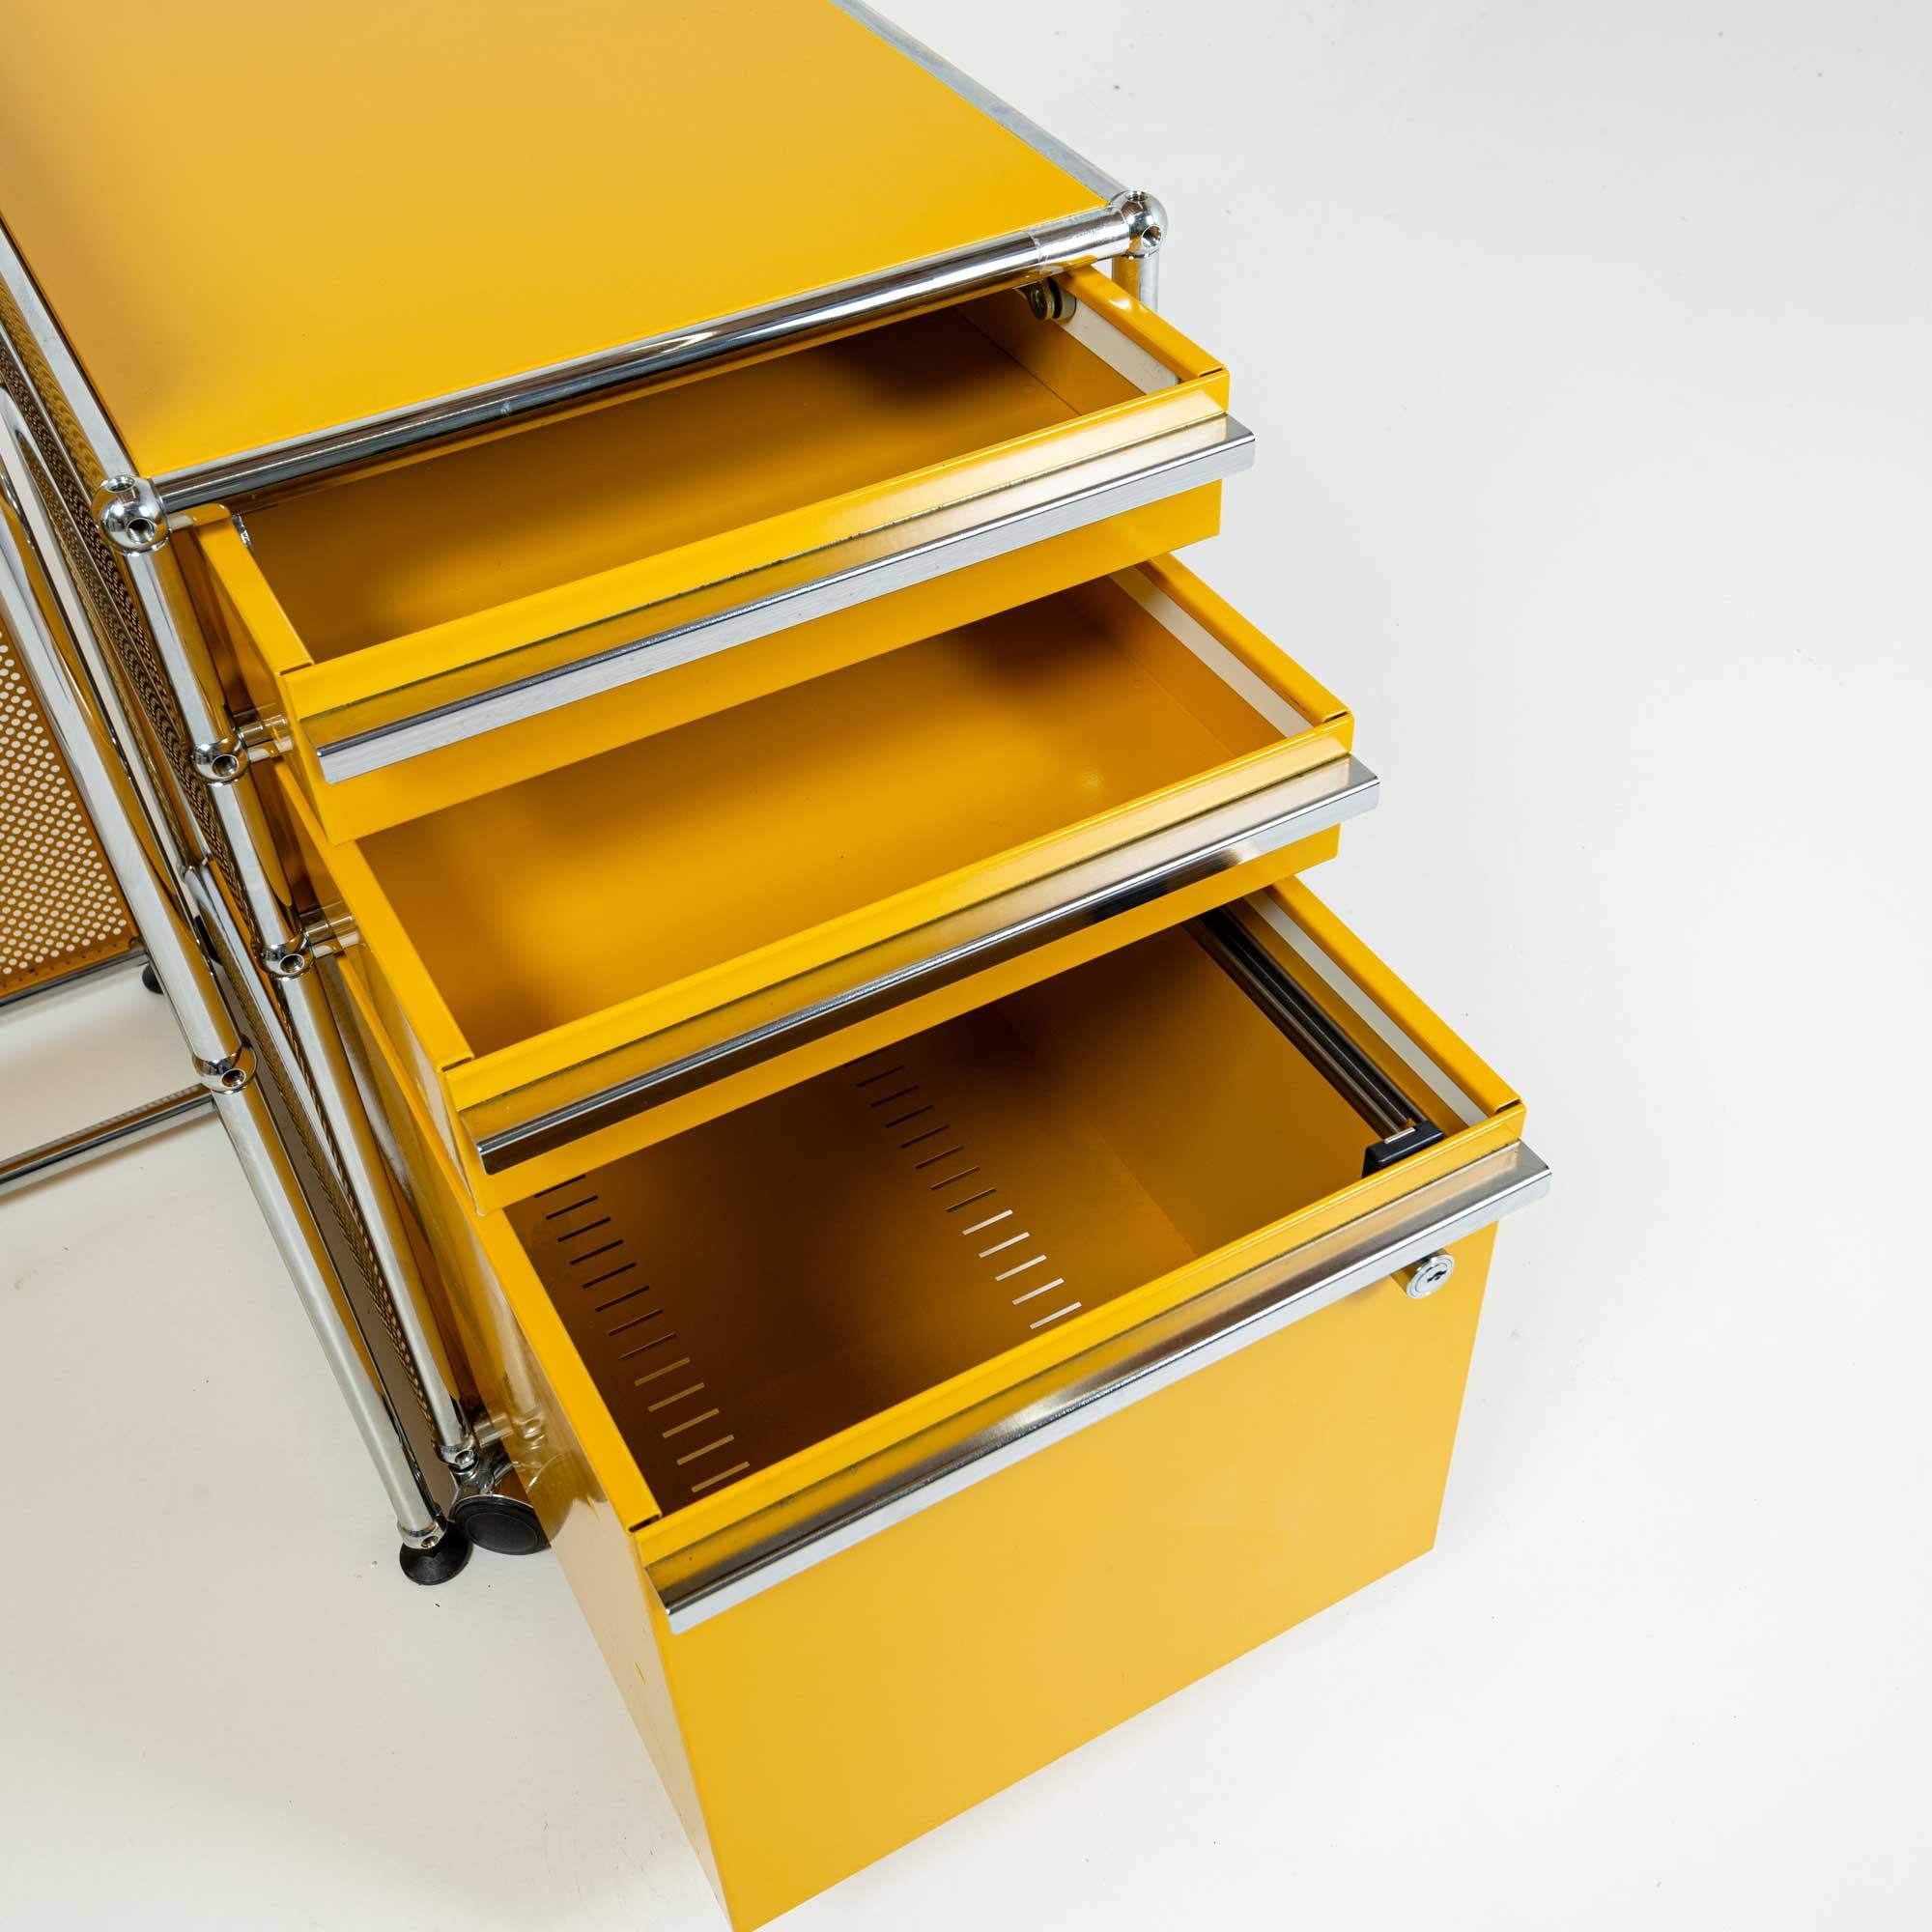 Steel USM Modular System Desk and Rolling Cabinet in Golden Yellow